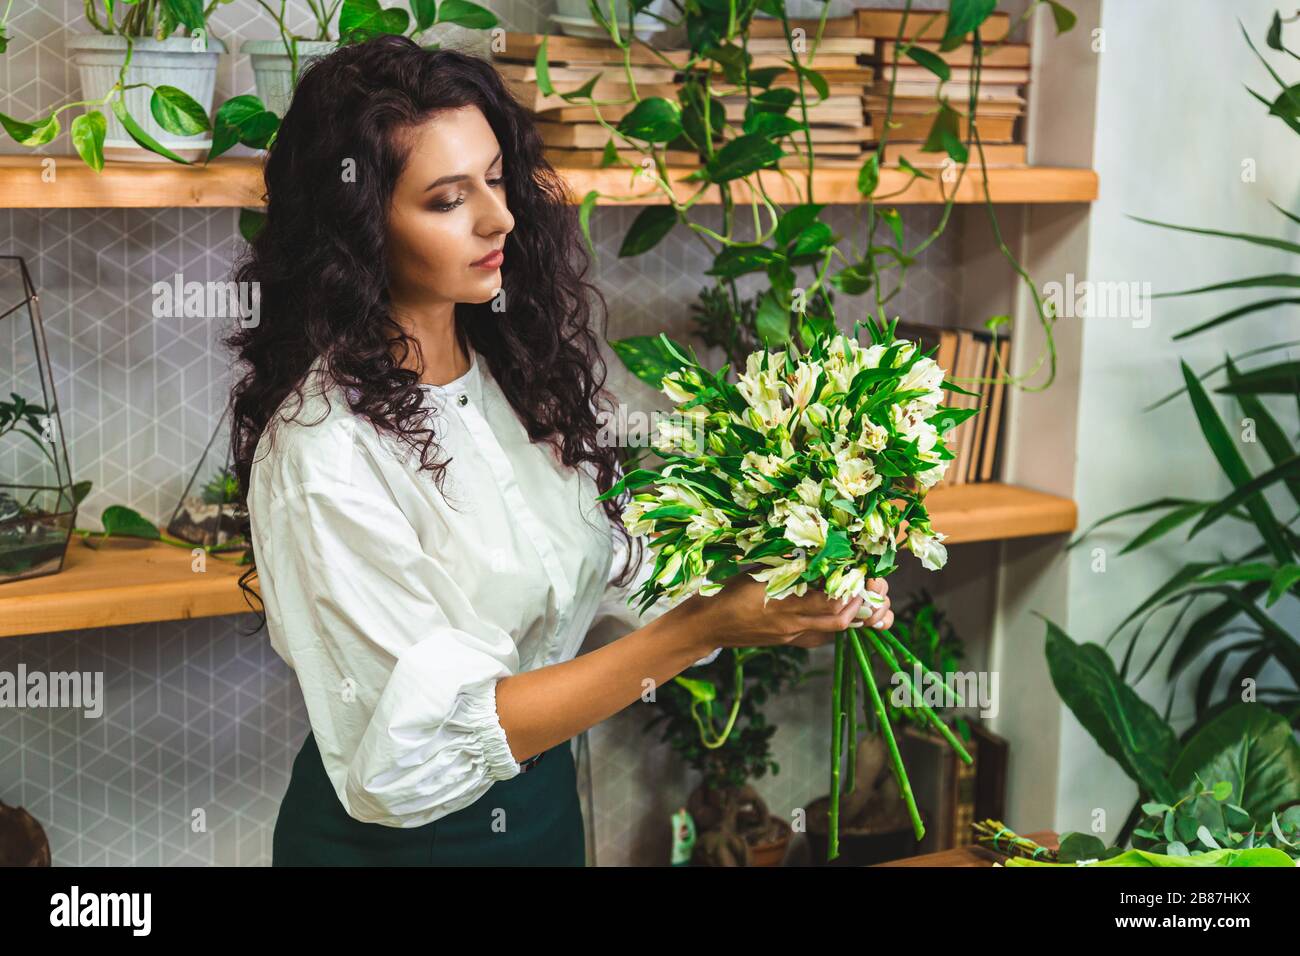 Attractive young woman florist is working in a flower shop. Stock Photo